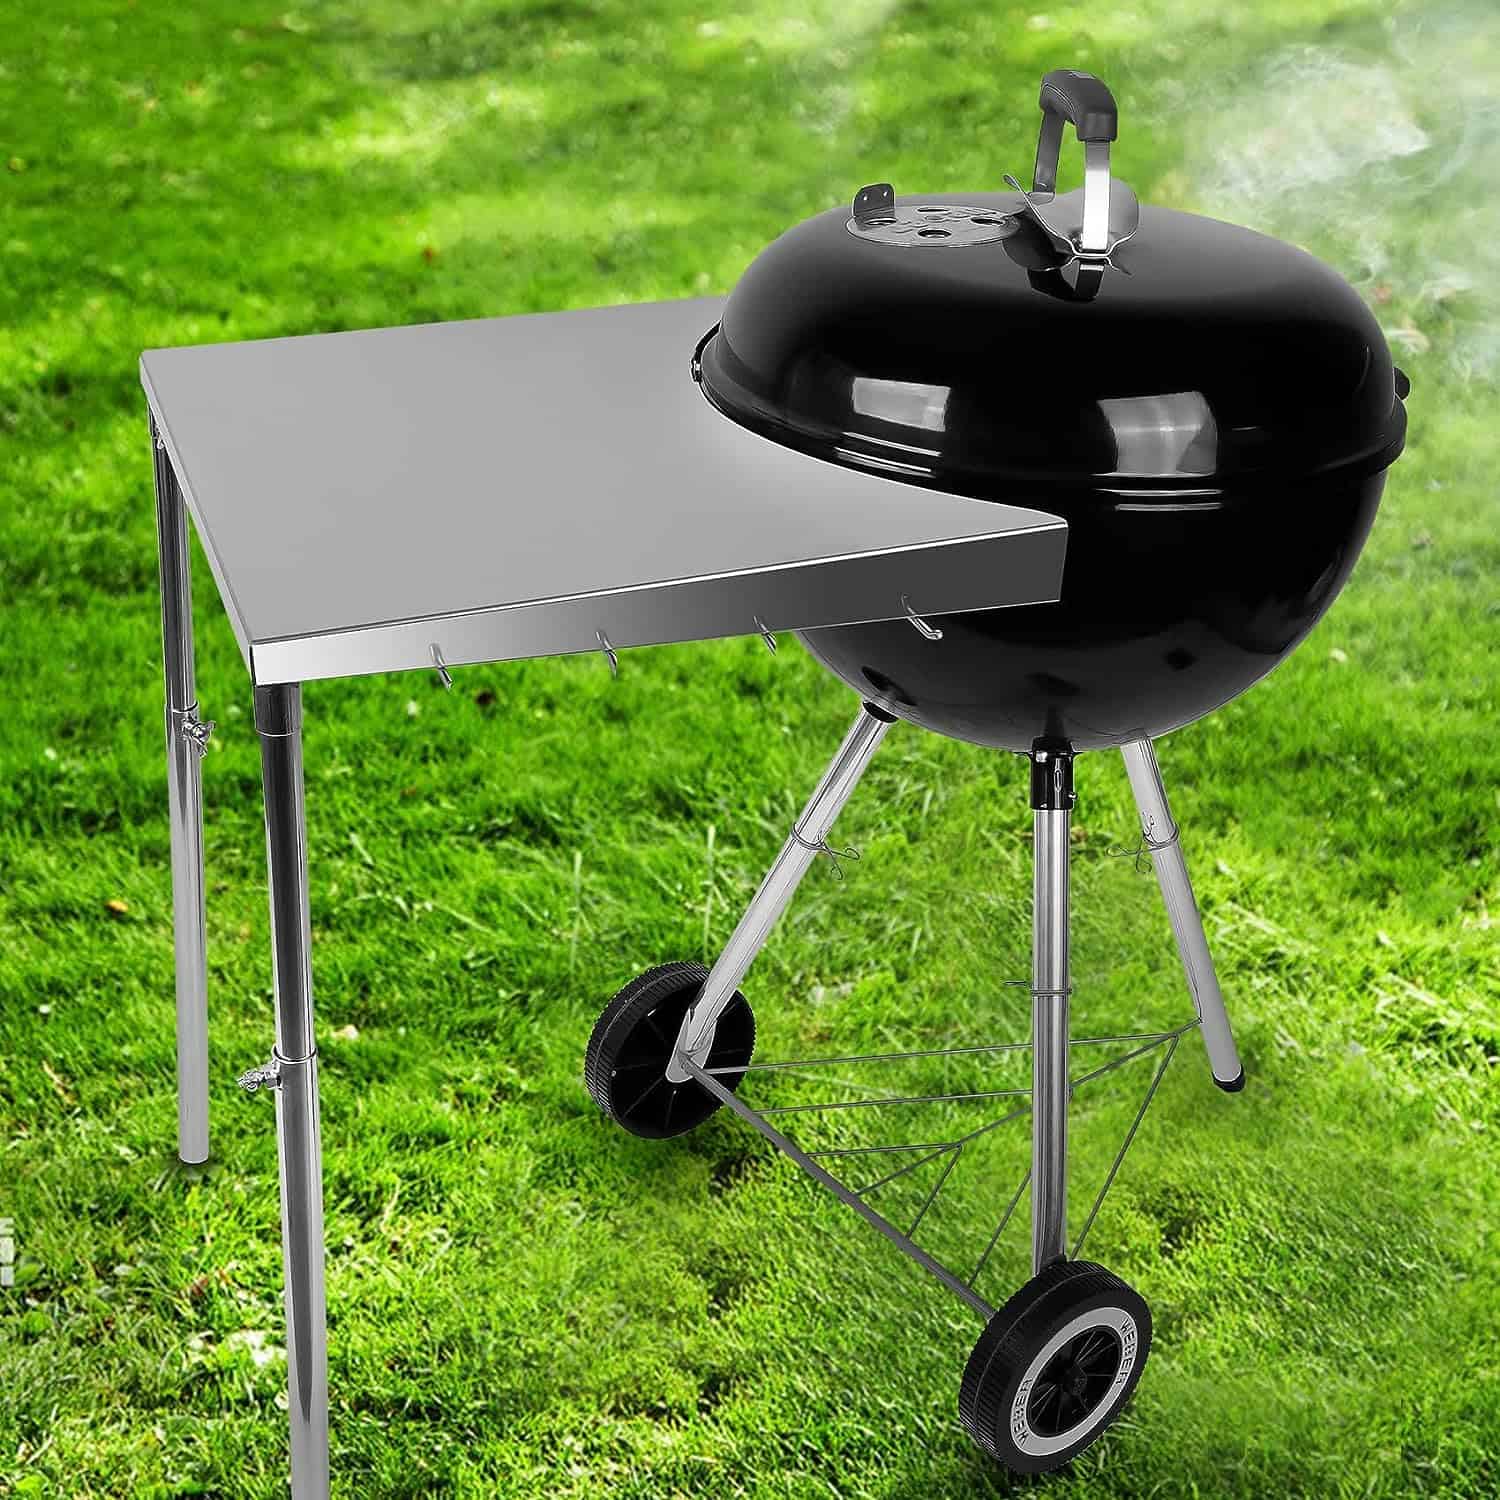 Stanbroil Stainless Steel Work Table Fits All Weber 18 22 Charcoal Kettle Grills and Other Similar Size Charcoal Kettle Grills Patent Pending 5